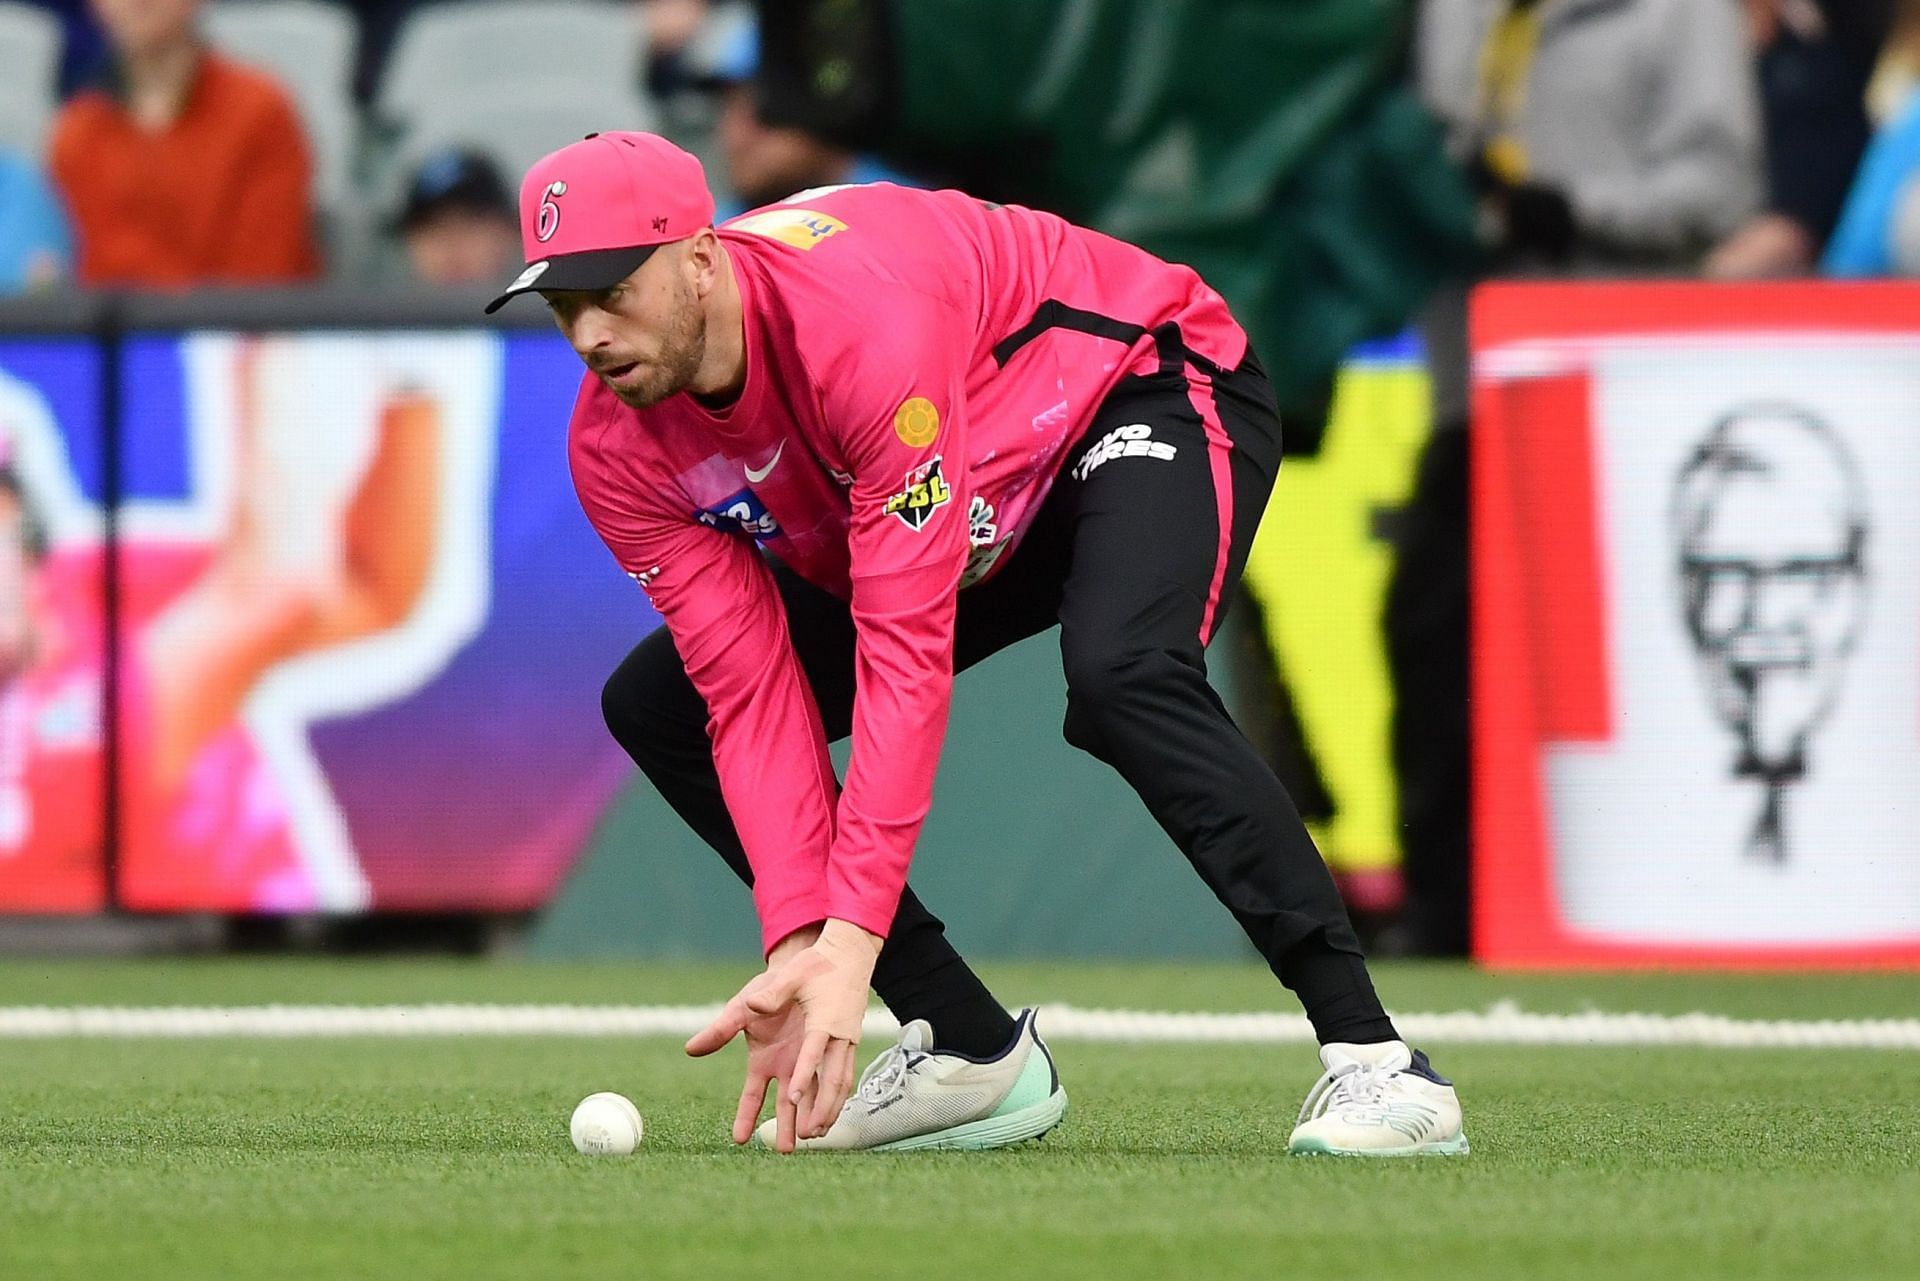 BBL - Adelaide Strikers v Sydney Sixers (Image: Getty)